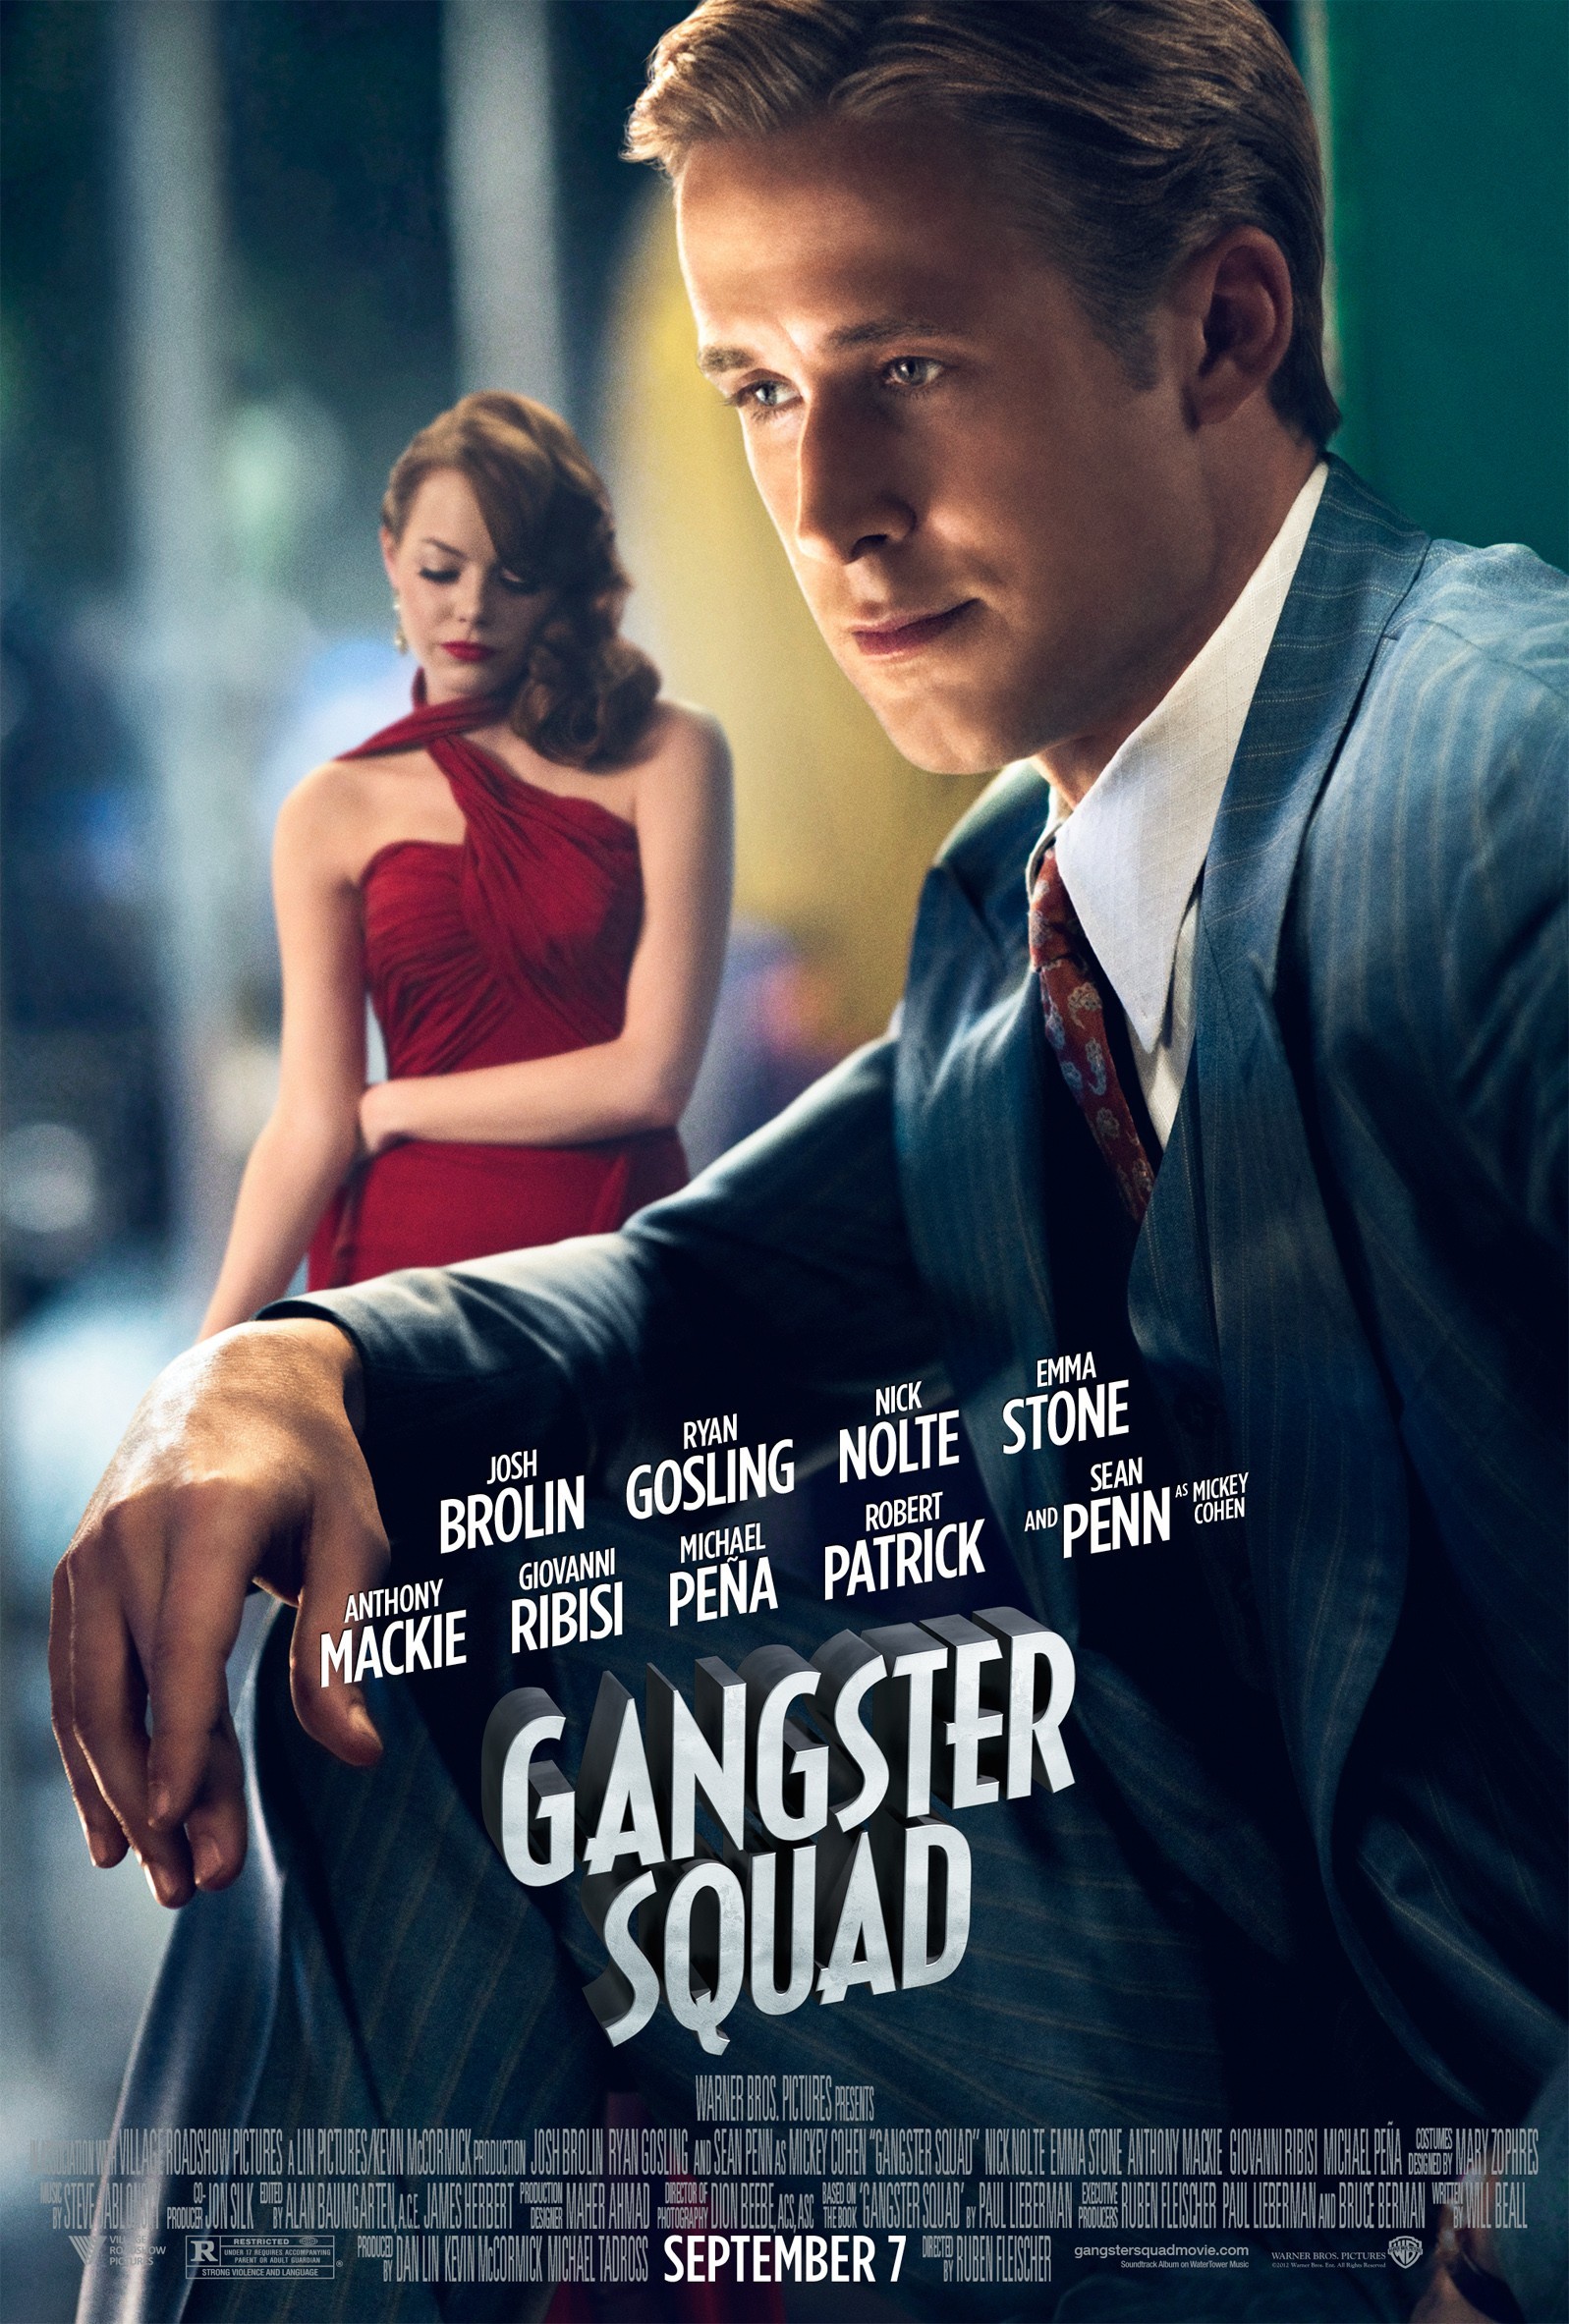 DERIVATIVE: IMITATIVE OF THE WORK OF ANOTHER PERSON, AND USUALLY DISAPPROVED OF FOR THAT REASON. SEE: GANGSTER SQUAD